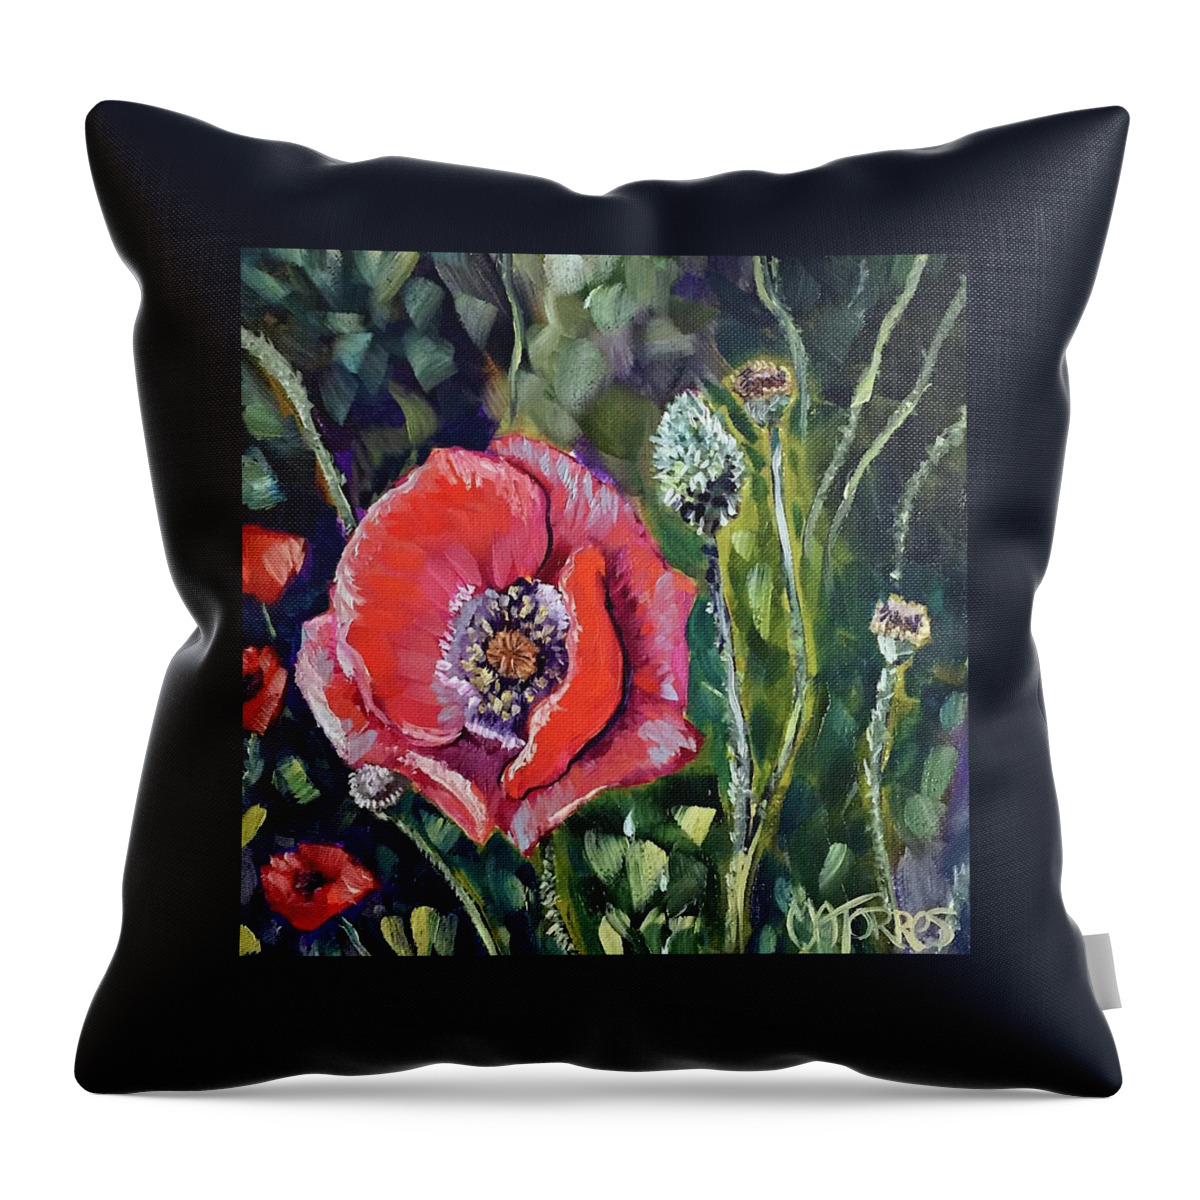 Poppy Throw Pillow featuring the painting I Stand Alone Poppy by Melissa Torres